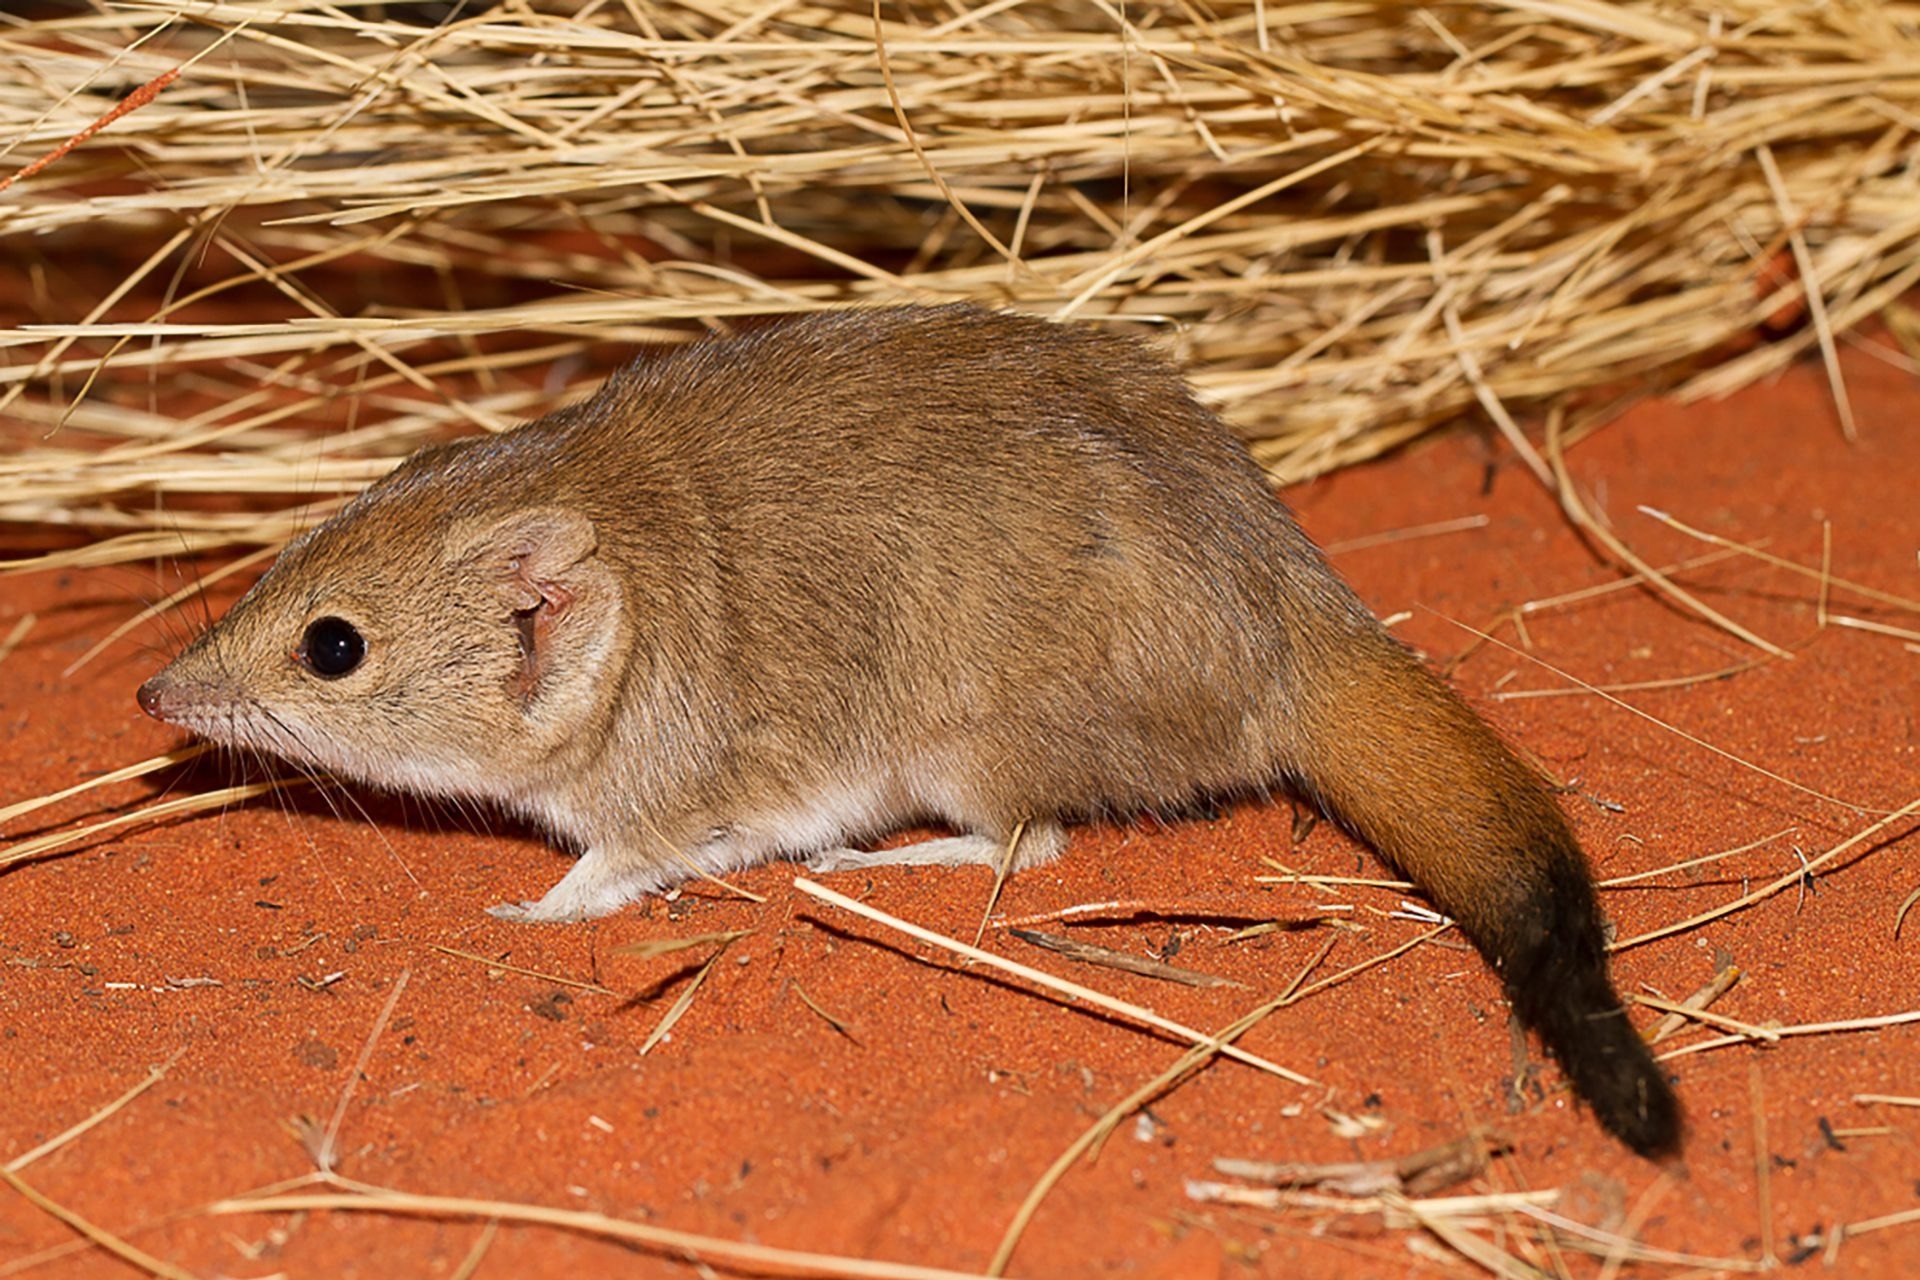 Research Reveals Three New Marsupial Species - Though All Likely Extinct